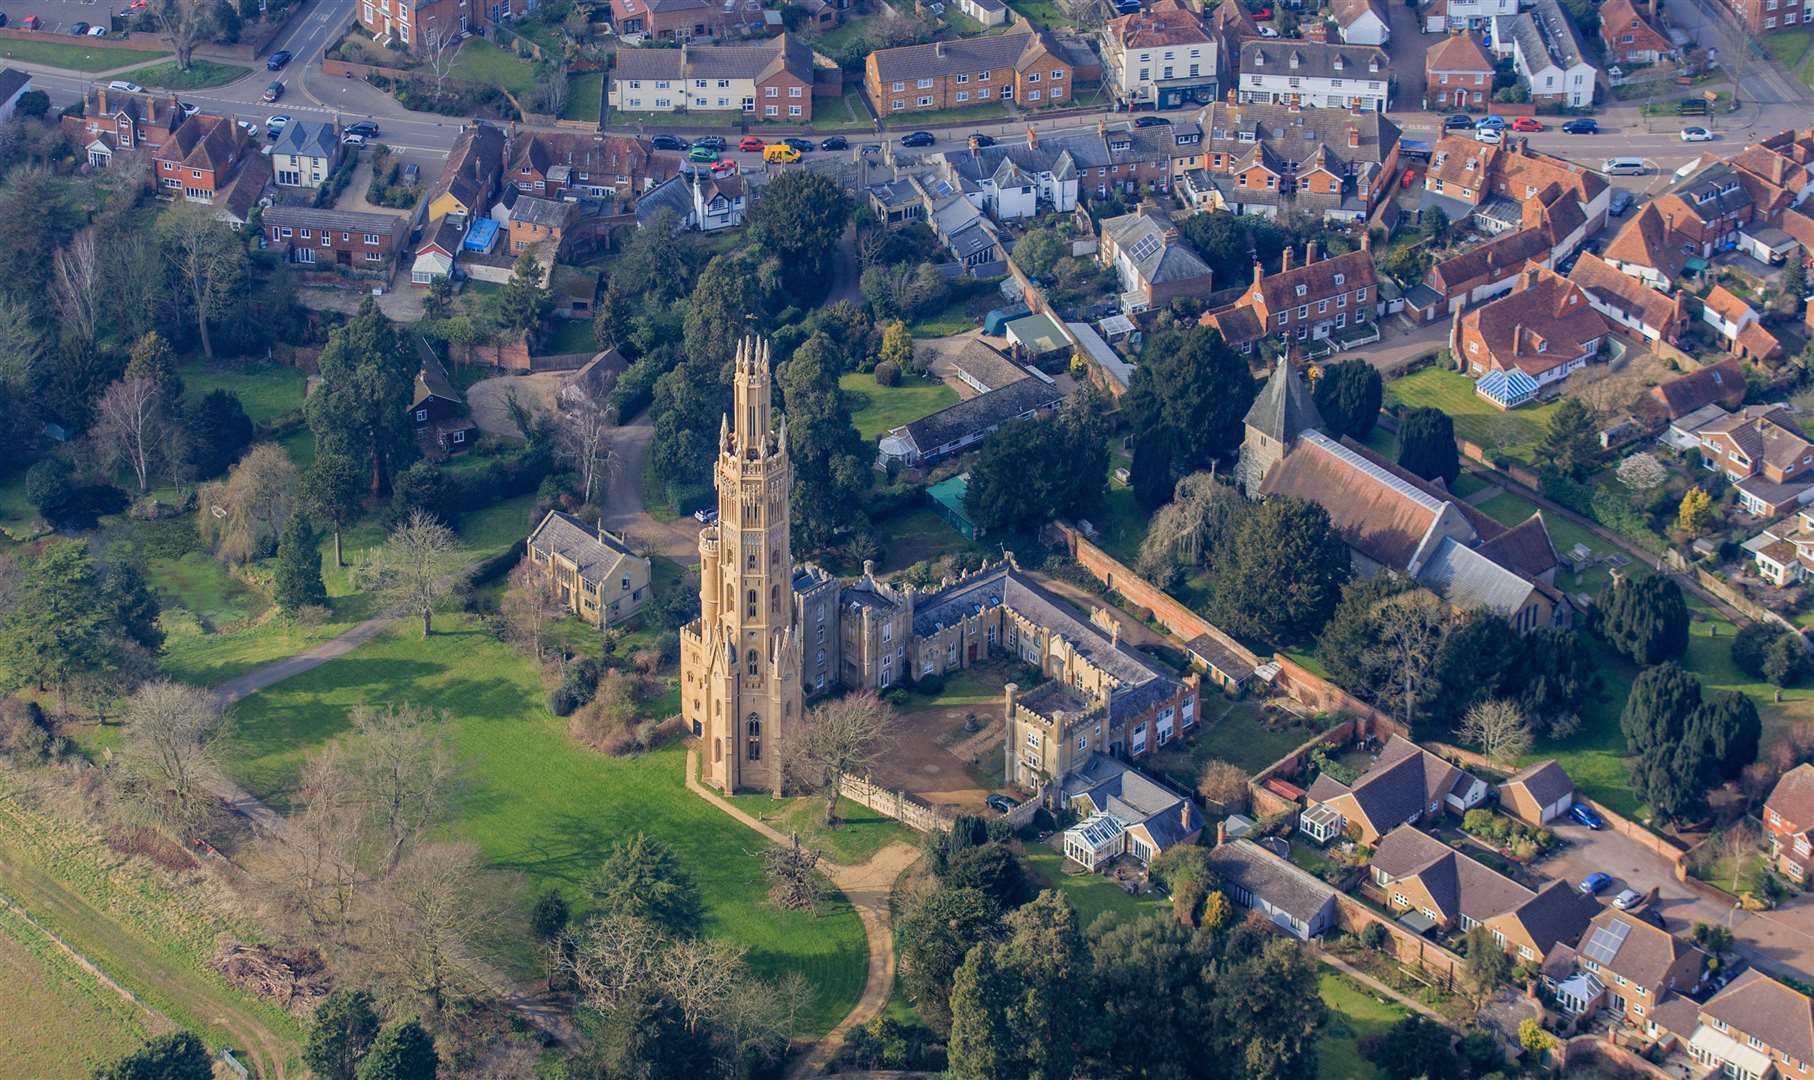 The tower is on offer with extensive grounds and sits in the village of Hadlow Picture: SWNS